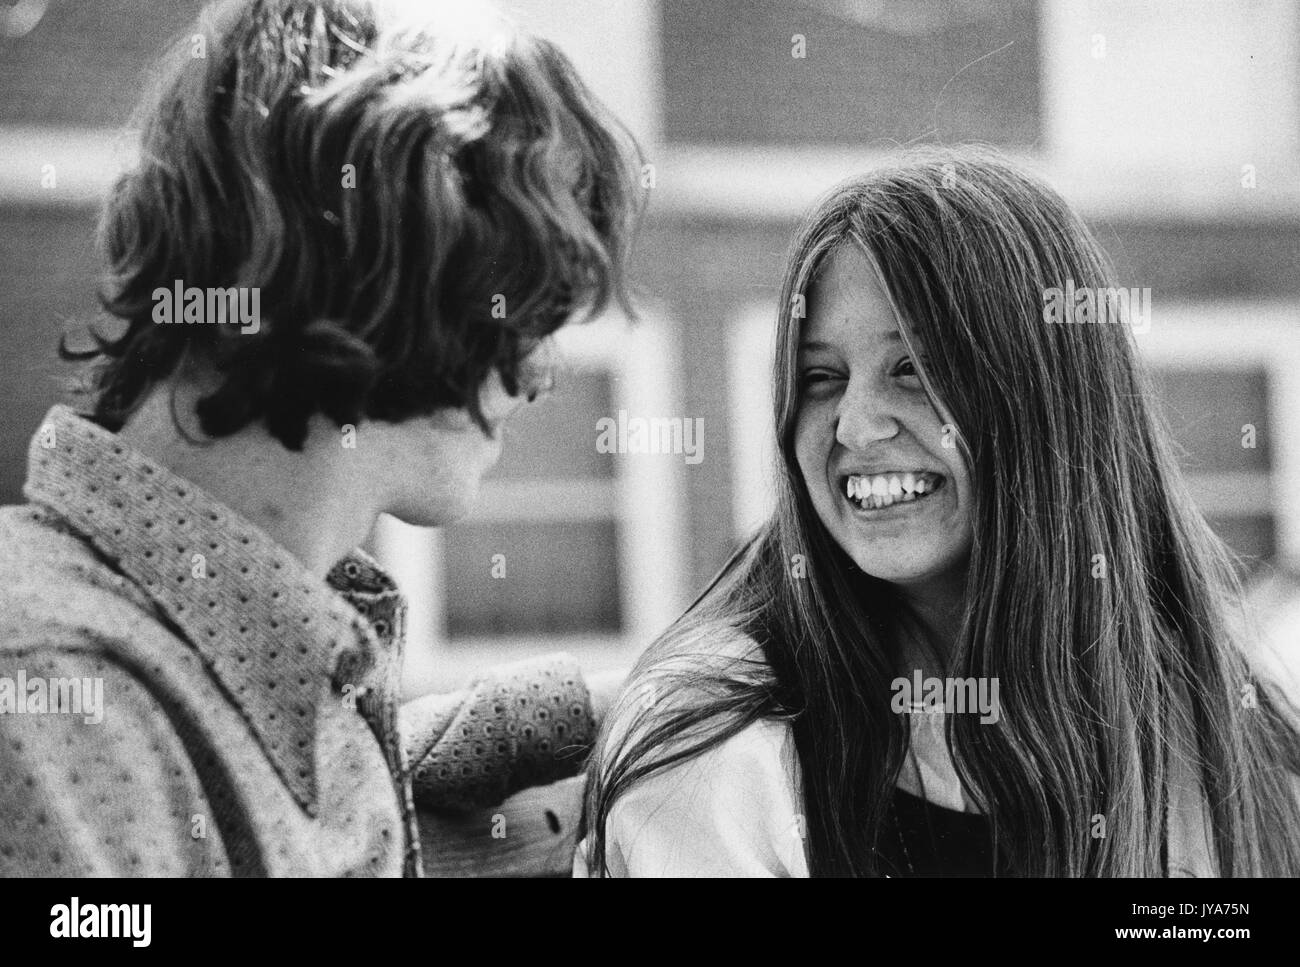 A photograph of a smiling undergraduate woman socializing with an undergraduate male as they sit on a bench on the Homewood campus of the Johns Hopkins University in Baltimore, Maryland during the first years that the university's undergraduate program admitted women. 1970. Stock Photo